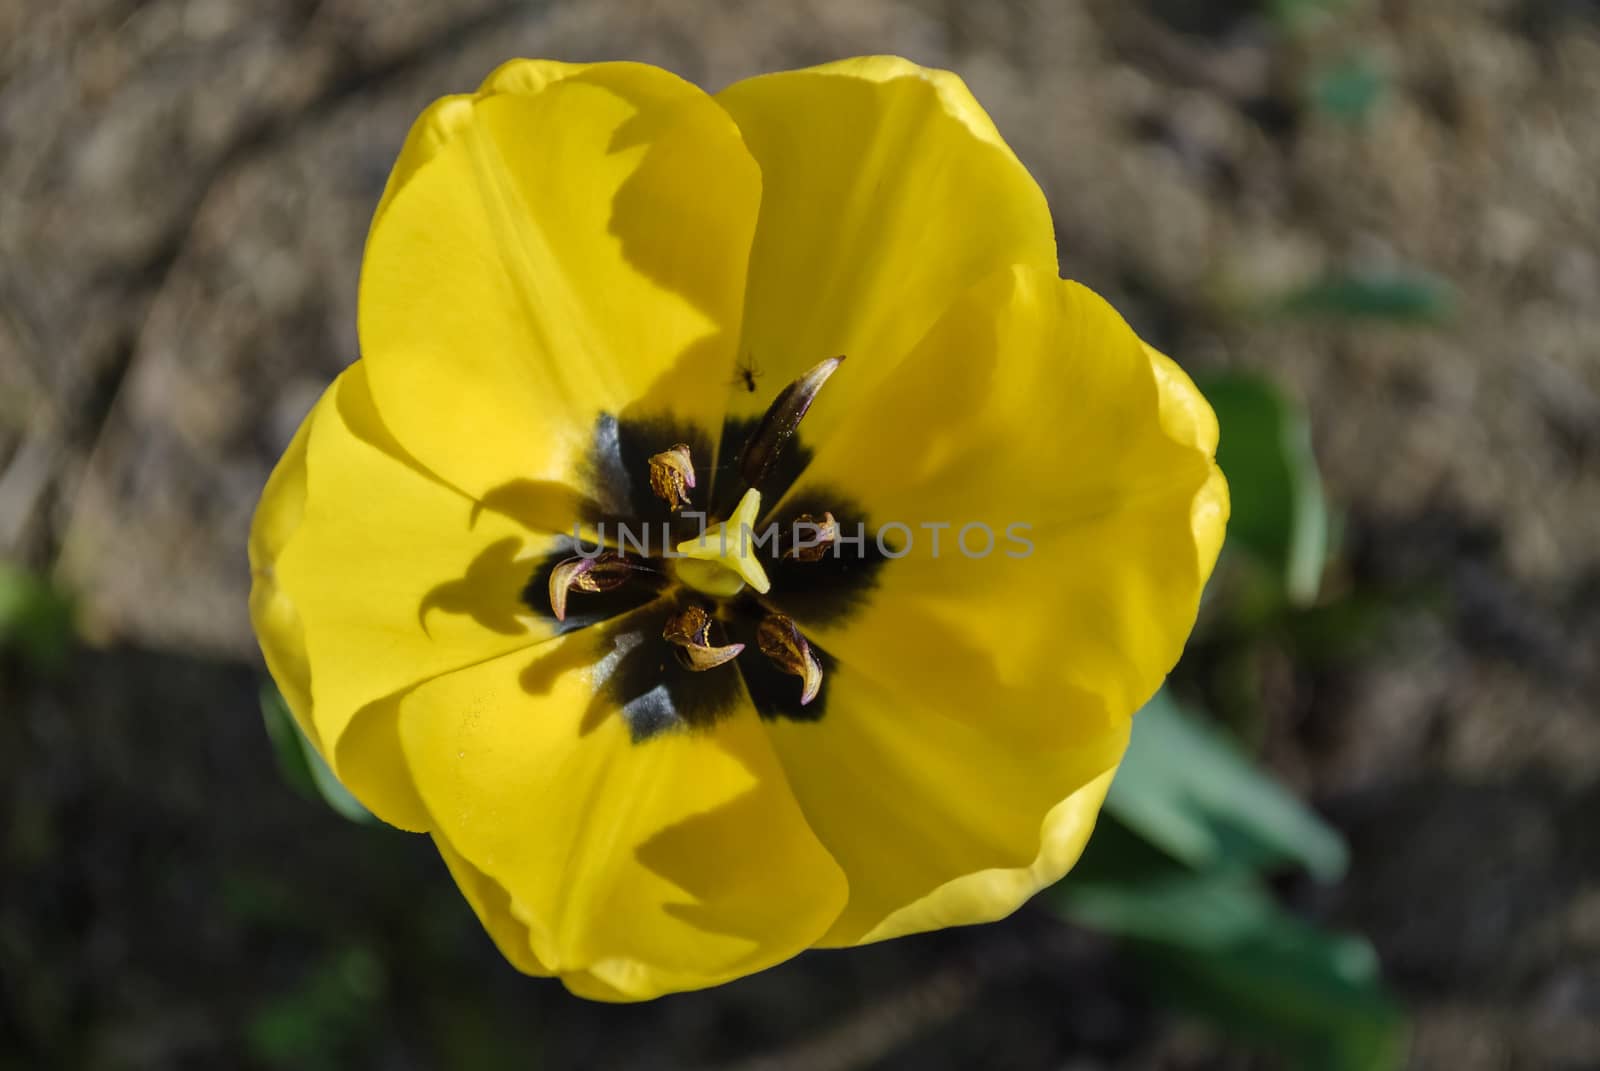 Bright yellow tulip flower on a background of brown earth.